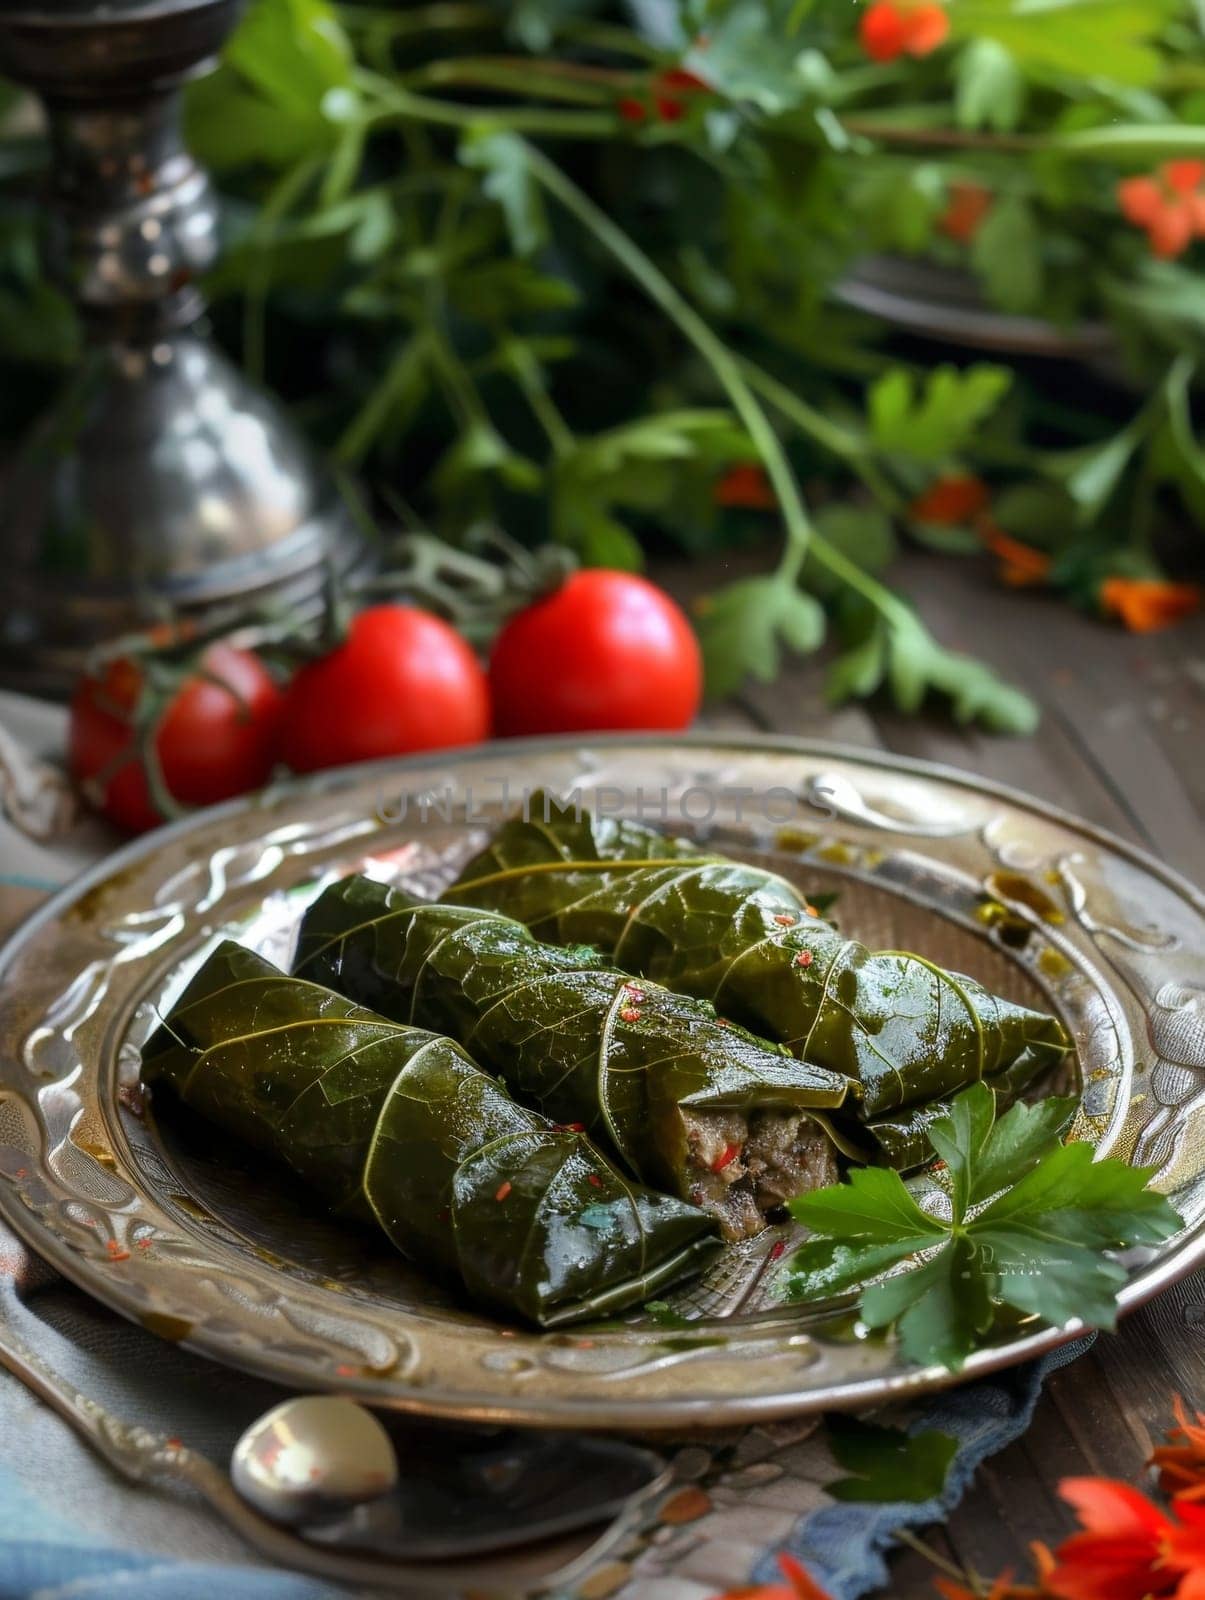 Traditional Armenian dolma made with stuffed grape leaves filled with a savory mixture of minced meat, rice, and aromatic herbs. This classic Mediterranean dish is a delightful representation